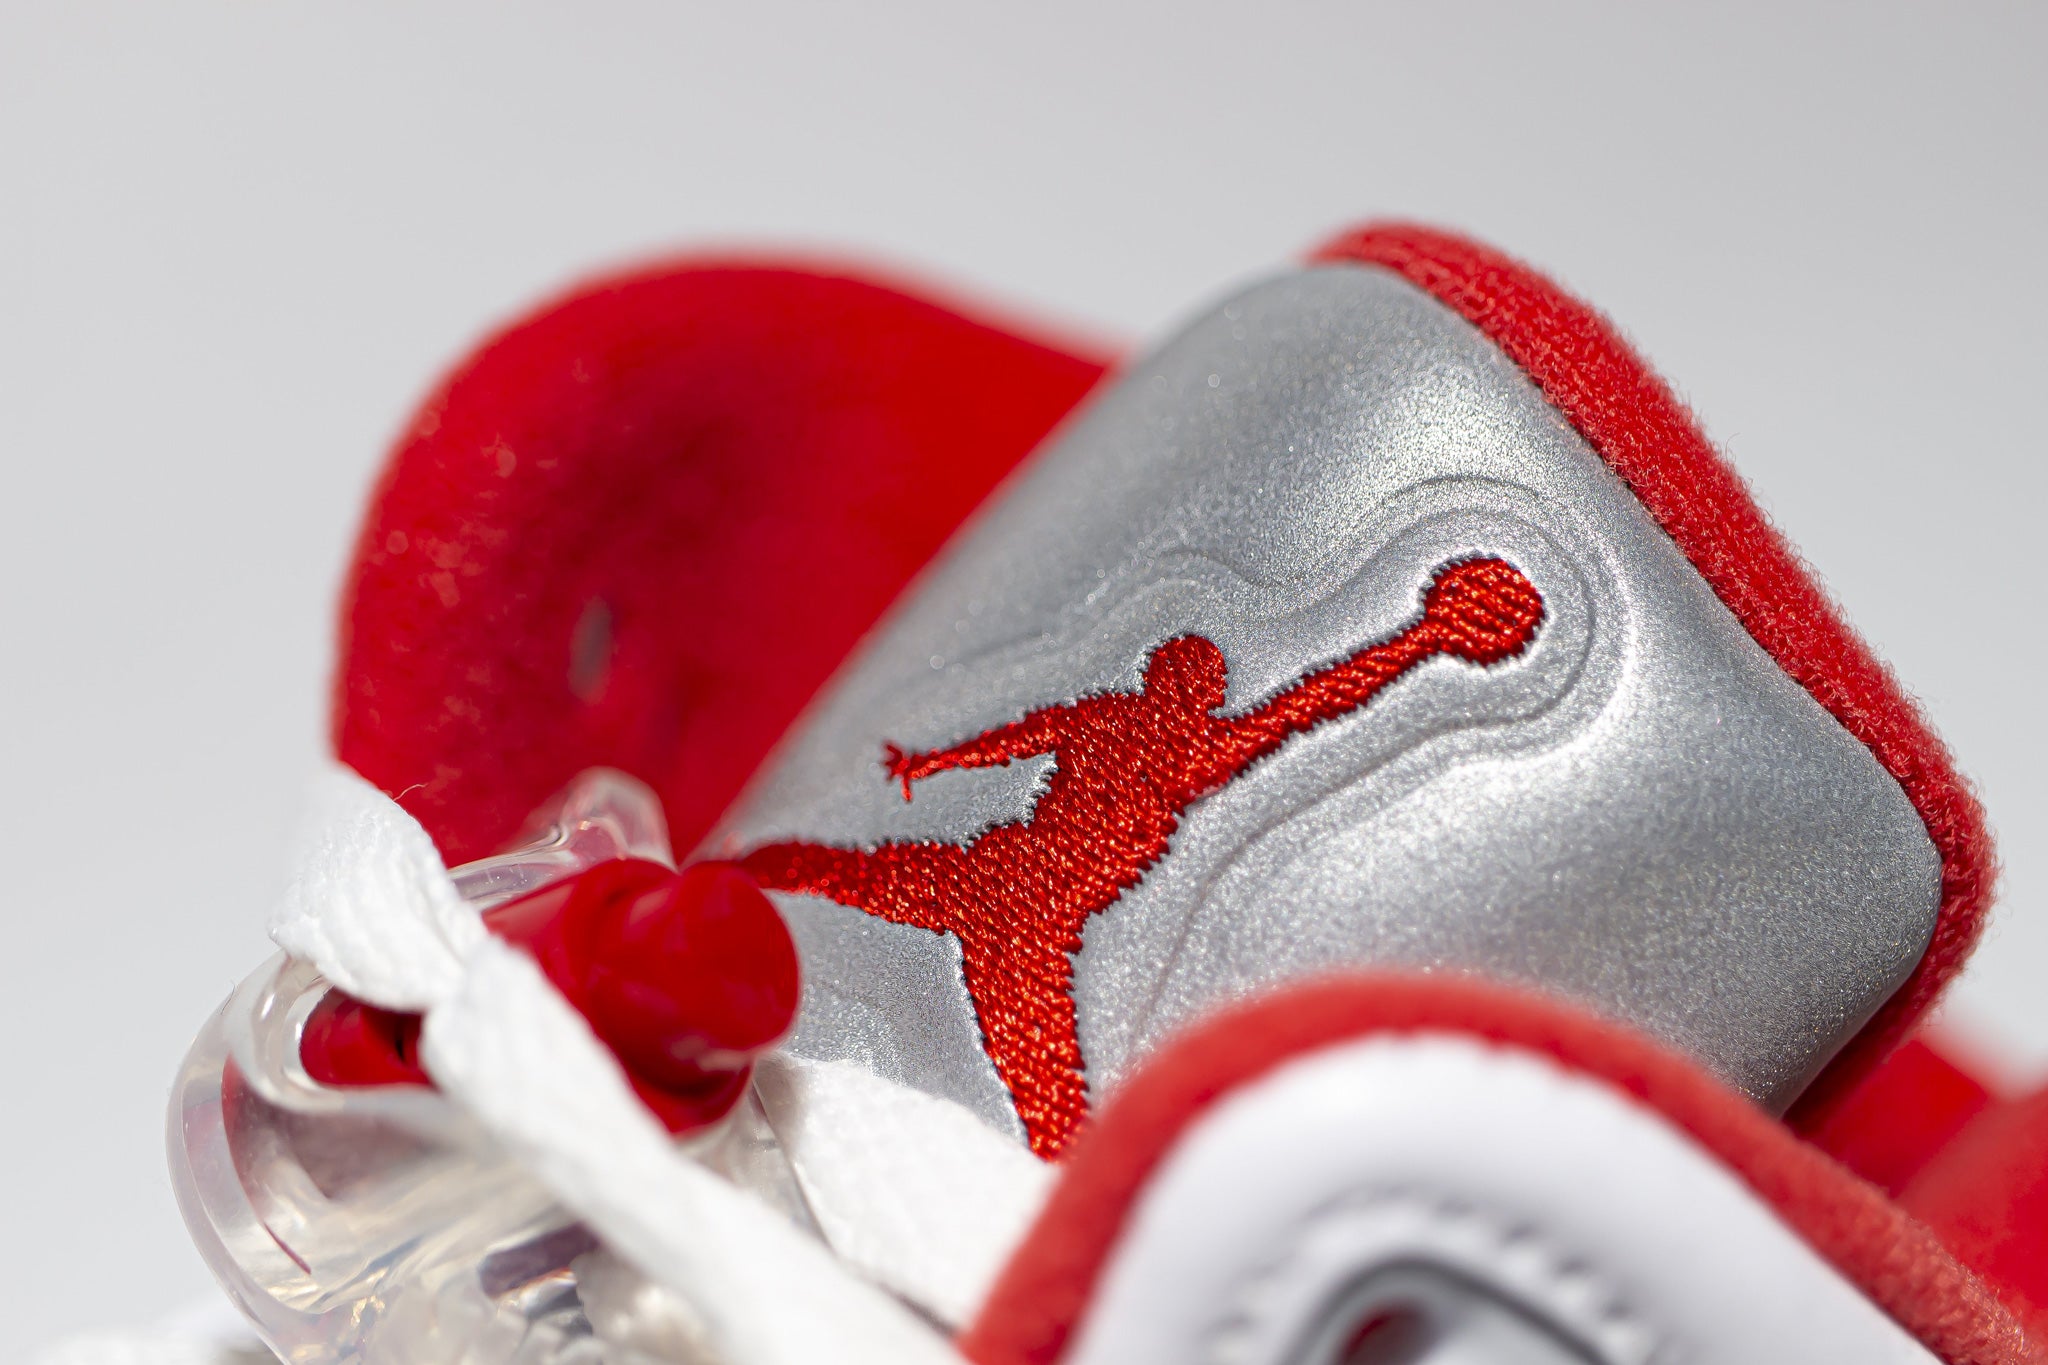 Close up view of embroidered red jumpman logo on 3m reflective sneaker tongue